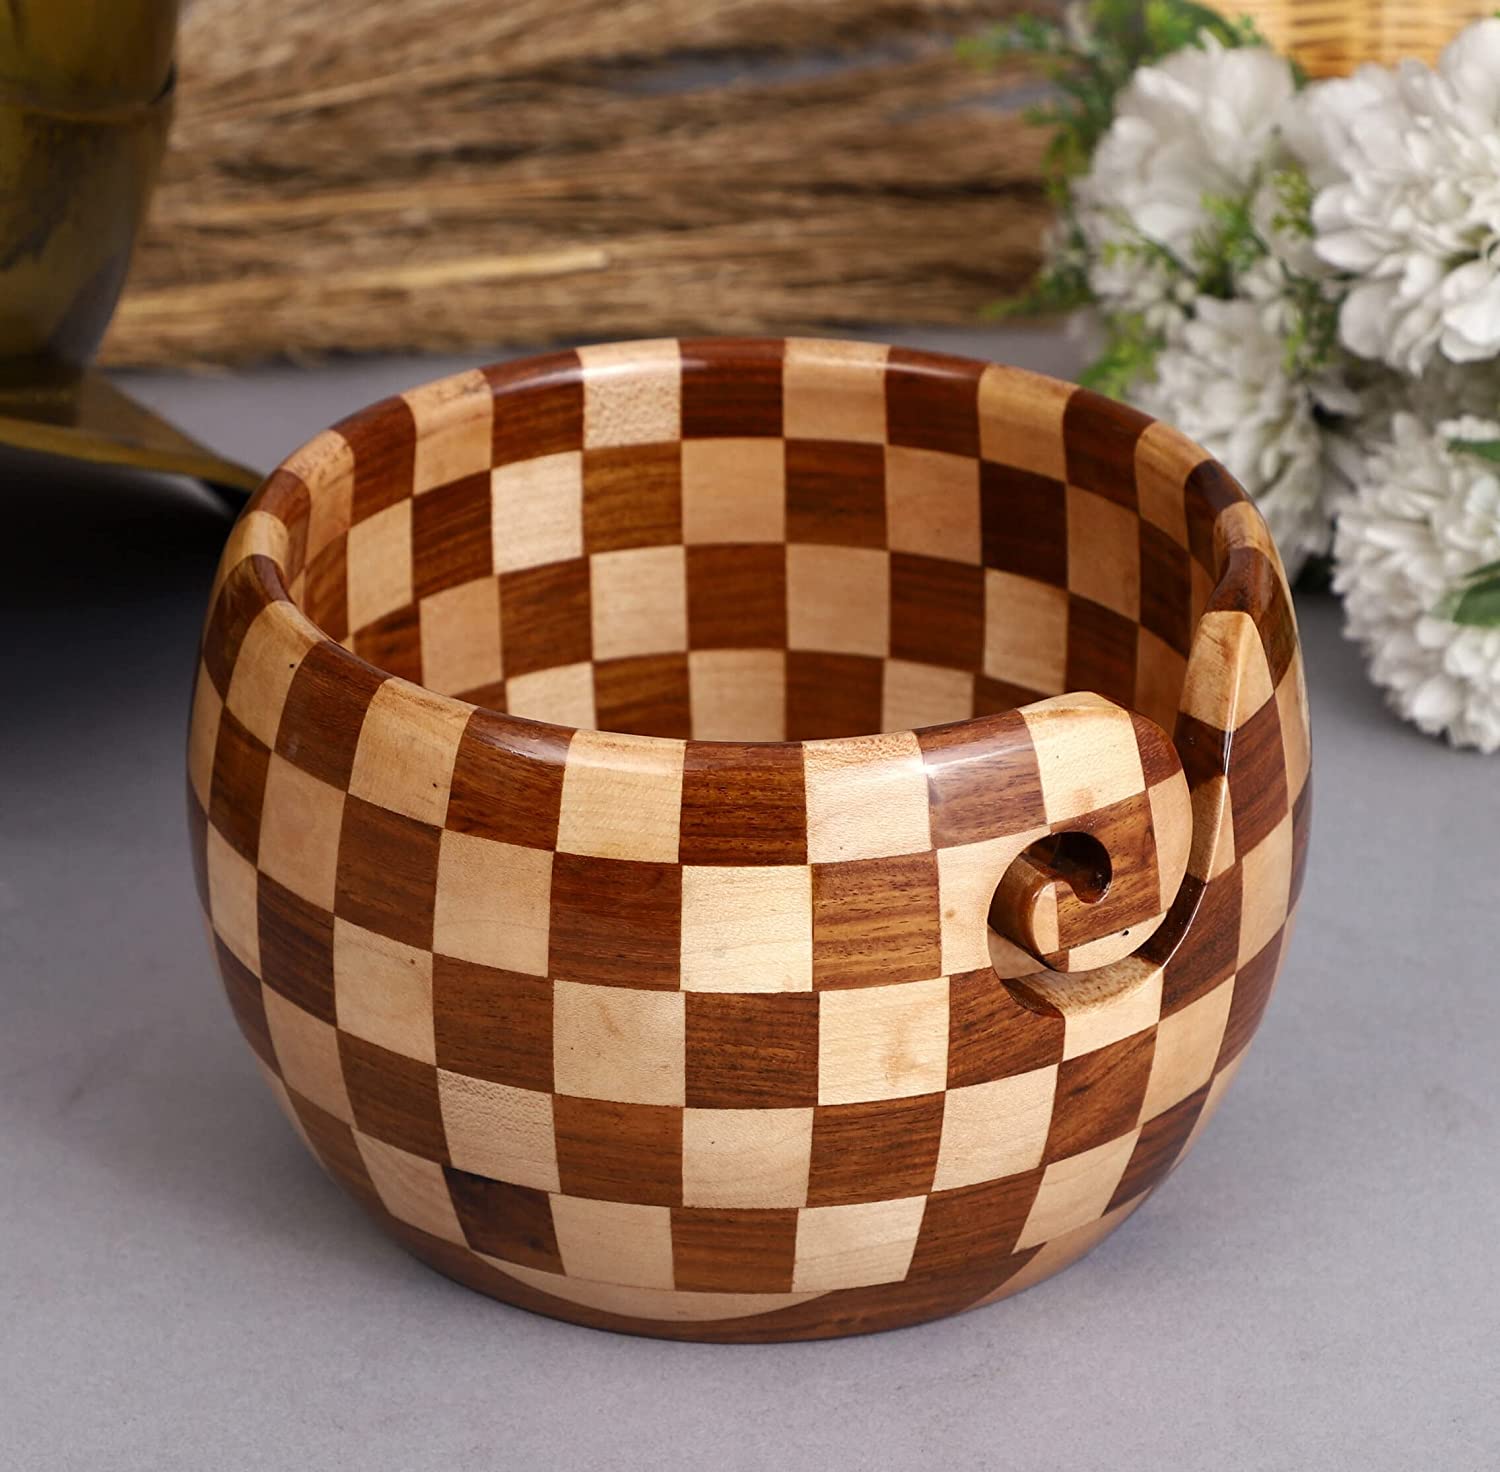 Natural Handcrafted Yarn Bowl for Knitting | Premium Wood Bowl for Yarn with Gorgeous Pattern | Knitting & Crochet Accessories , Home decor ideas